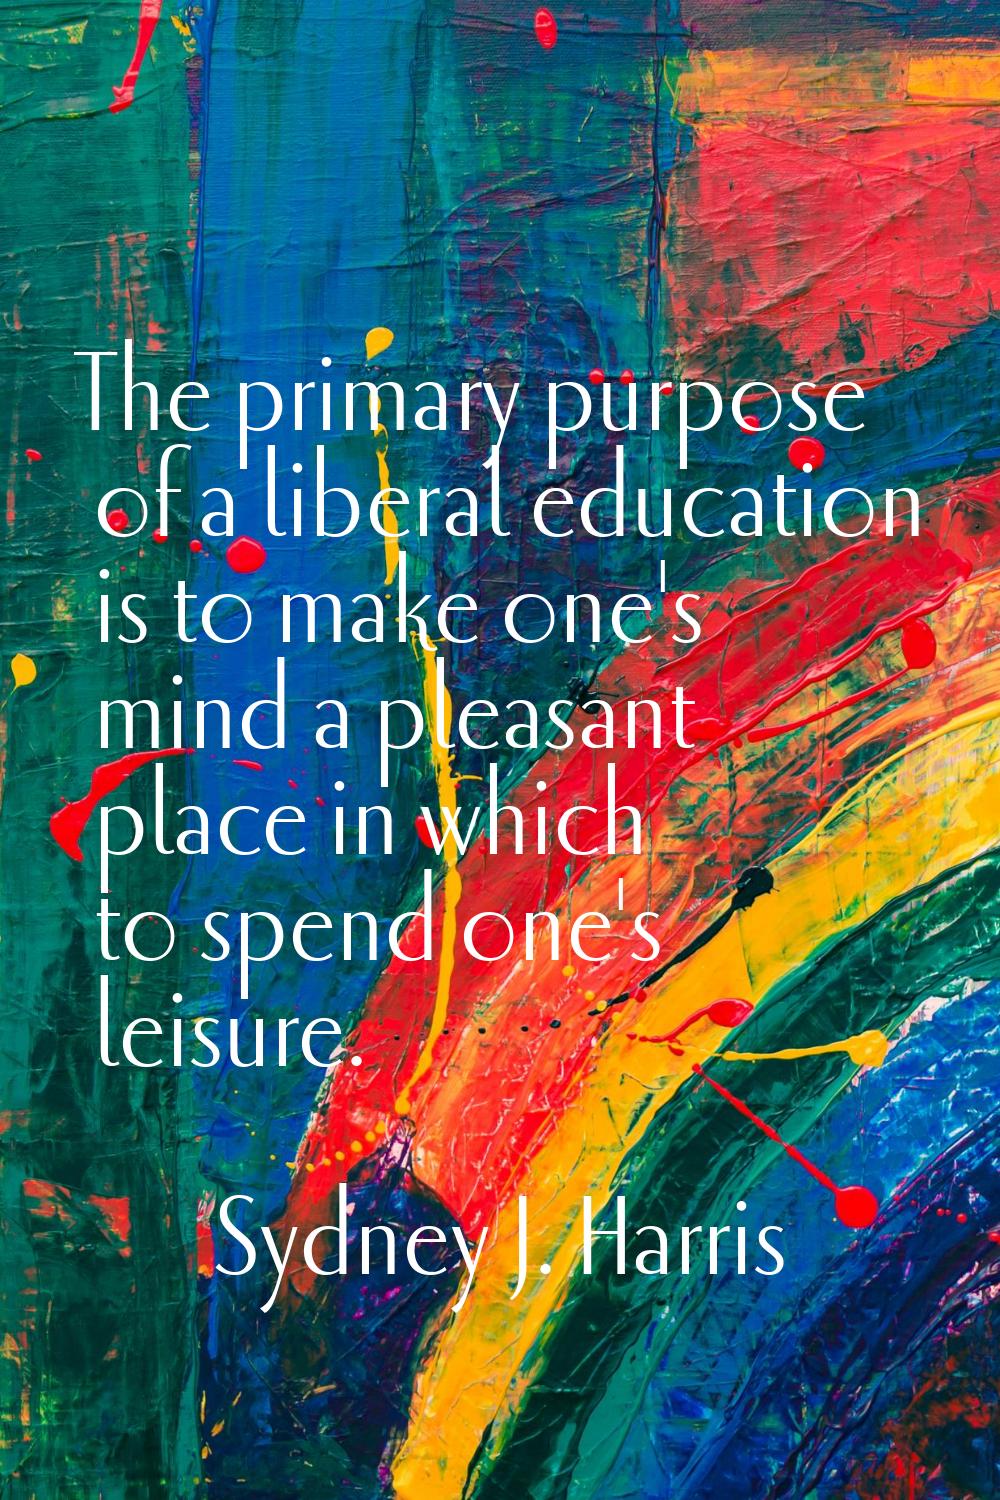 The primary purpose of a liberal education is to make one's mind a pleasant place in which to spend